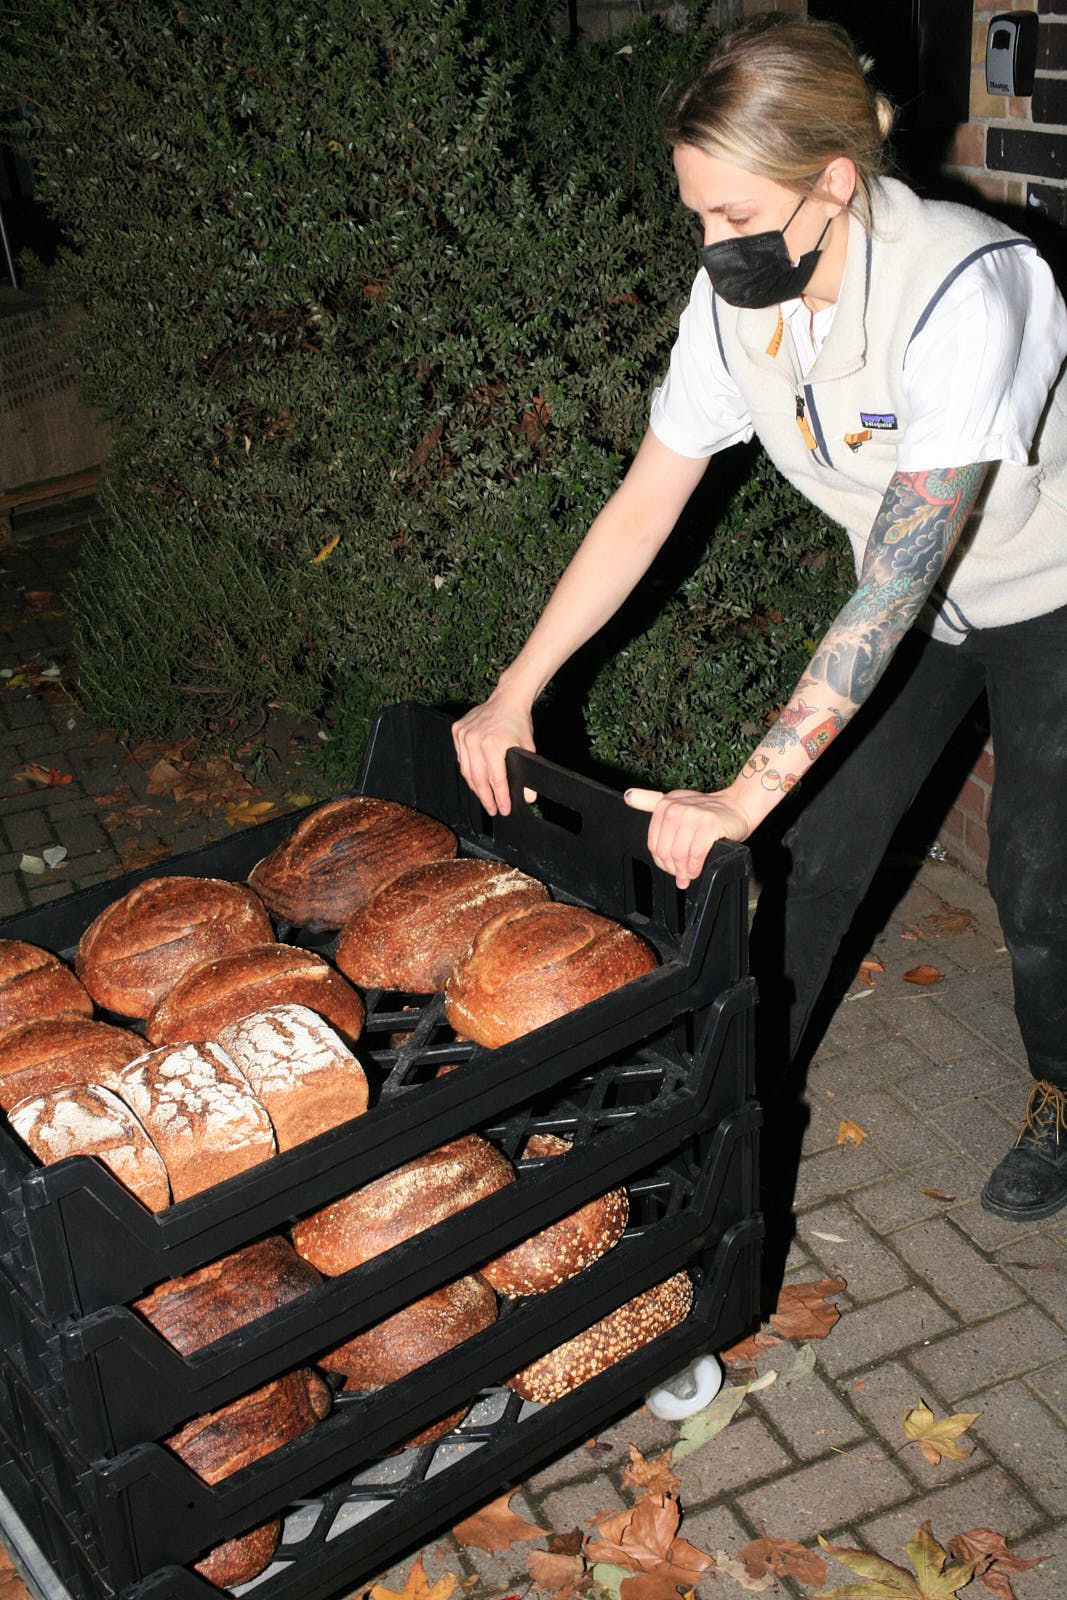 Evans stands over crates of bread outside the bakery